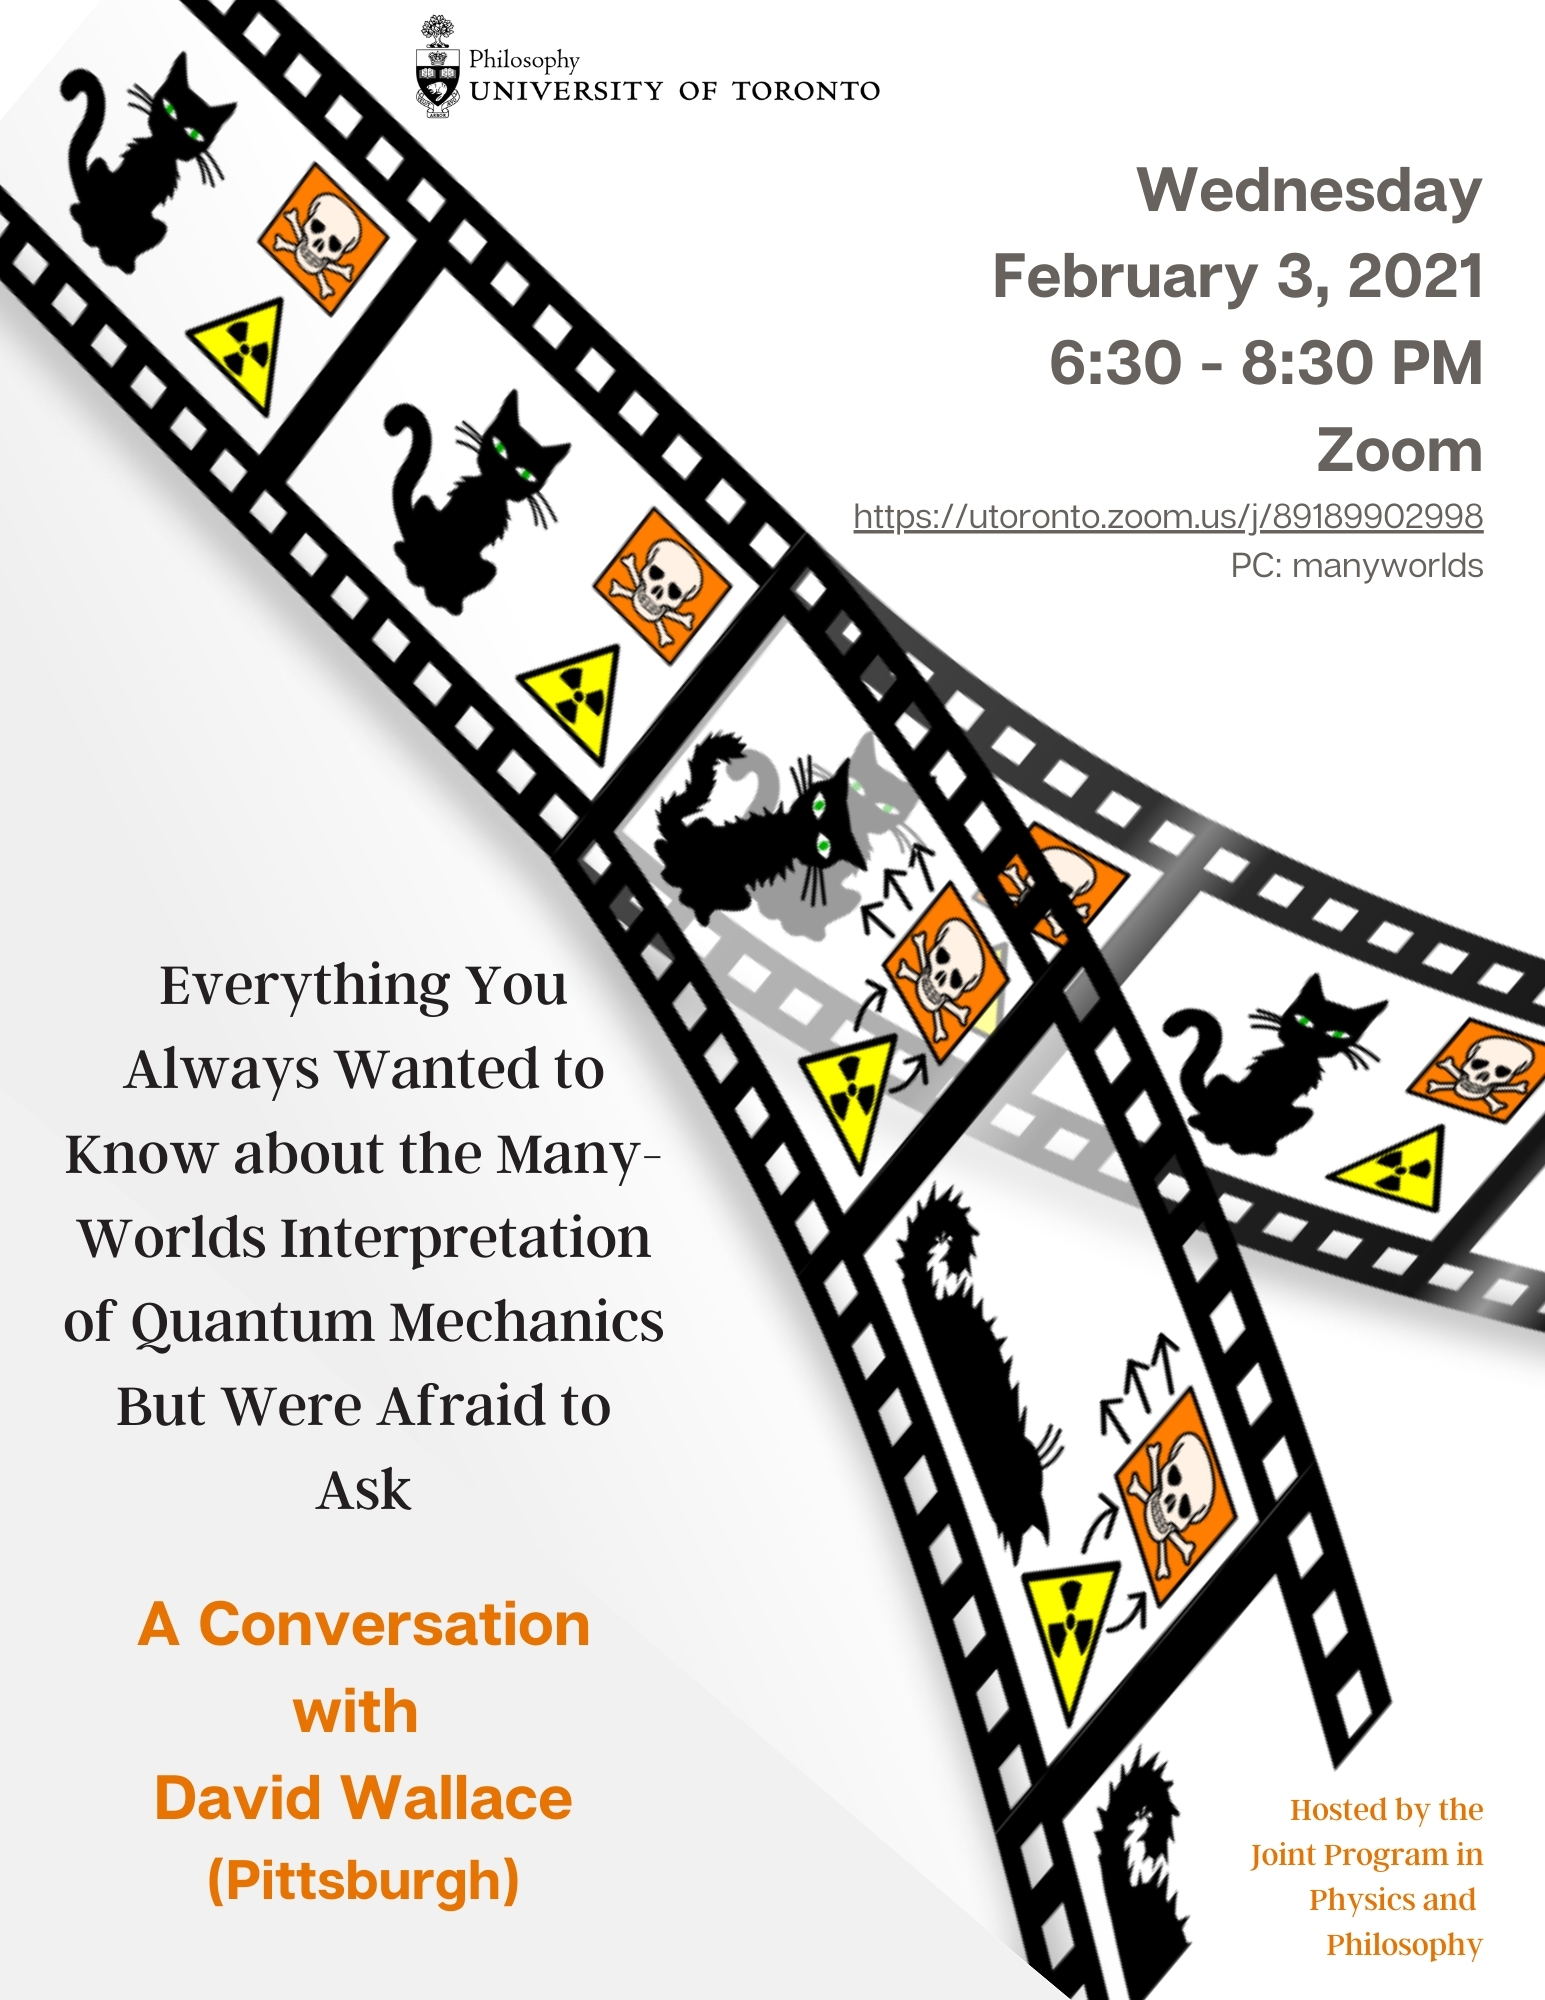 Event poster for David Wallace talk, featuring a split filmstrip displaying Schroedinger's Cat; all other information repeated in text